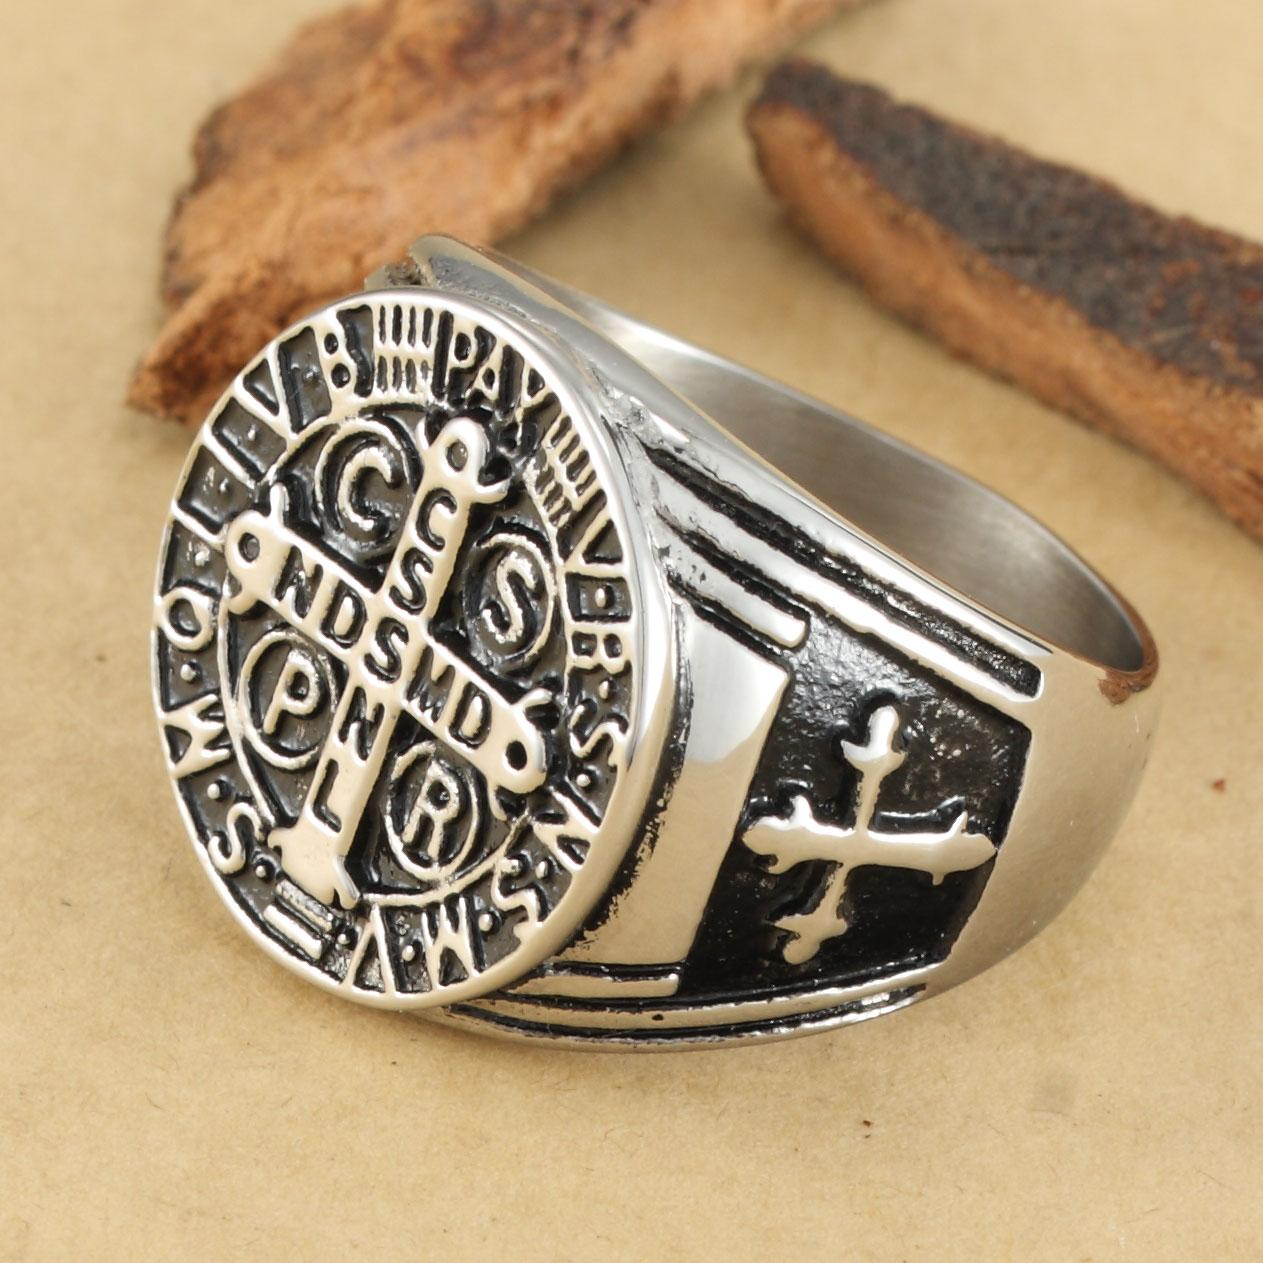 After you bring those scary demons into your household, you may want to get them back out again. We have found a couple of items that may do the trick. The first of all is a catholic exorcism ring.<br><br> It's available <a href="https://amzn.to/2OblcRk" "nofollow" target="_blank">here.</a>